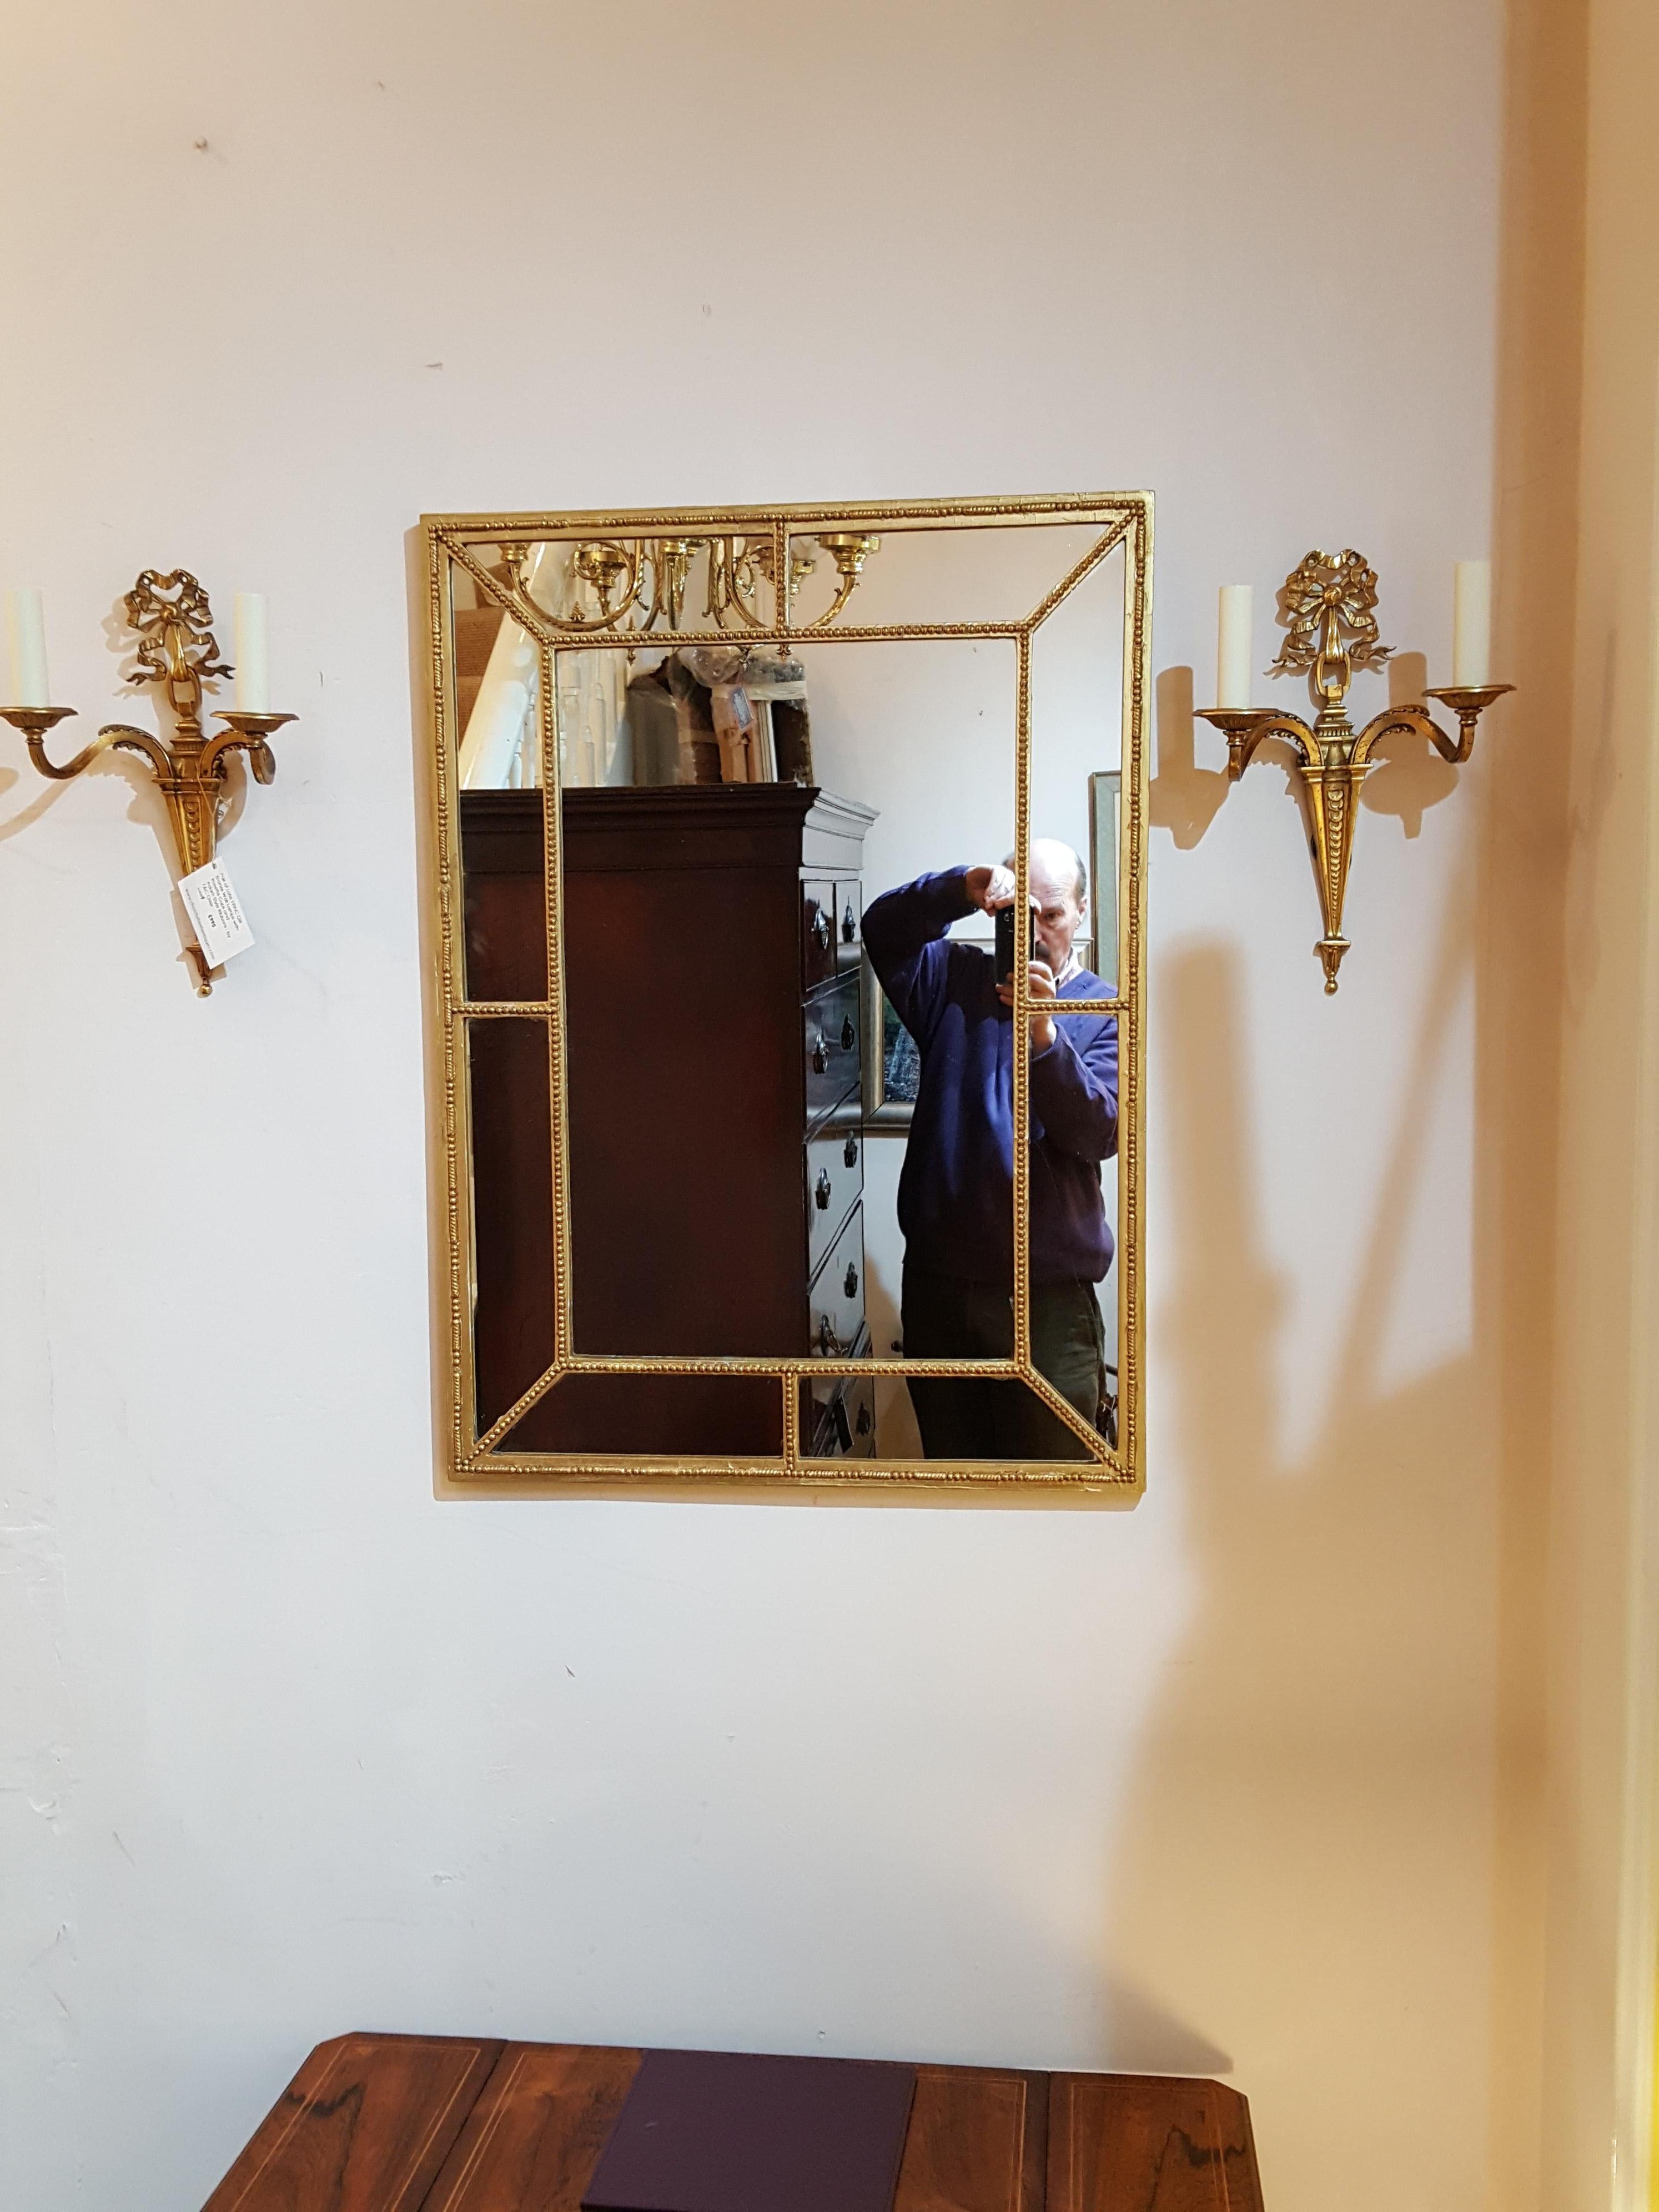 Edwardian gilt framed mirror with egg and dart applications
Measures: 25